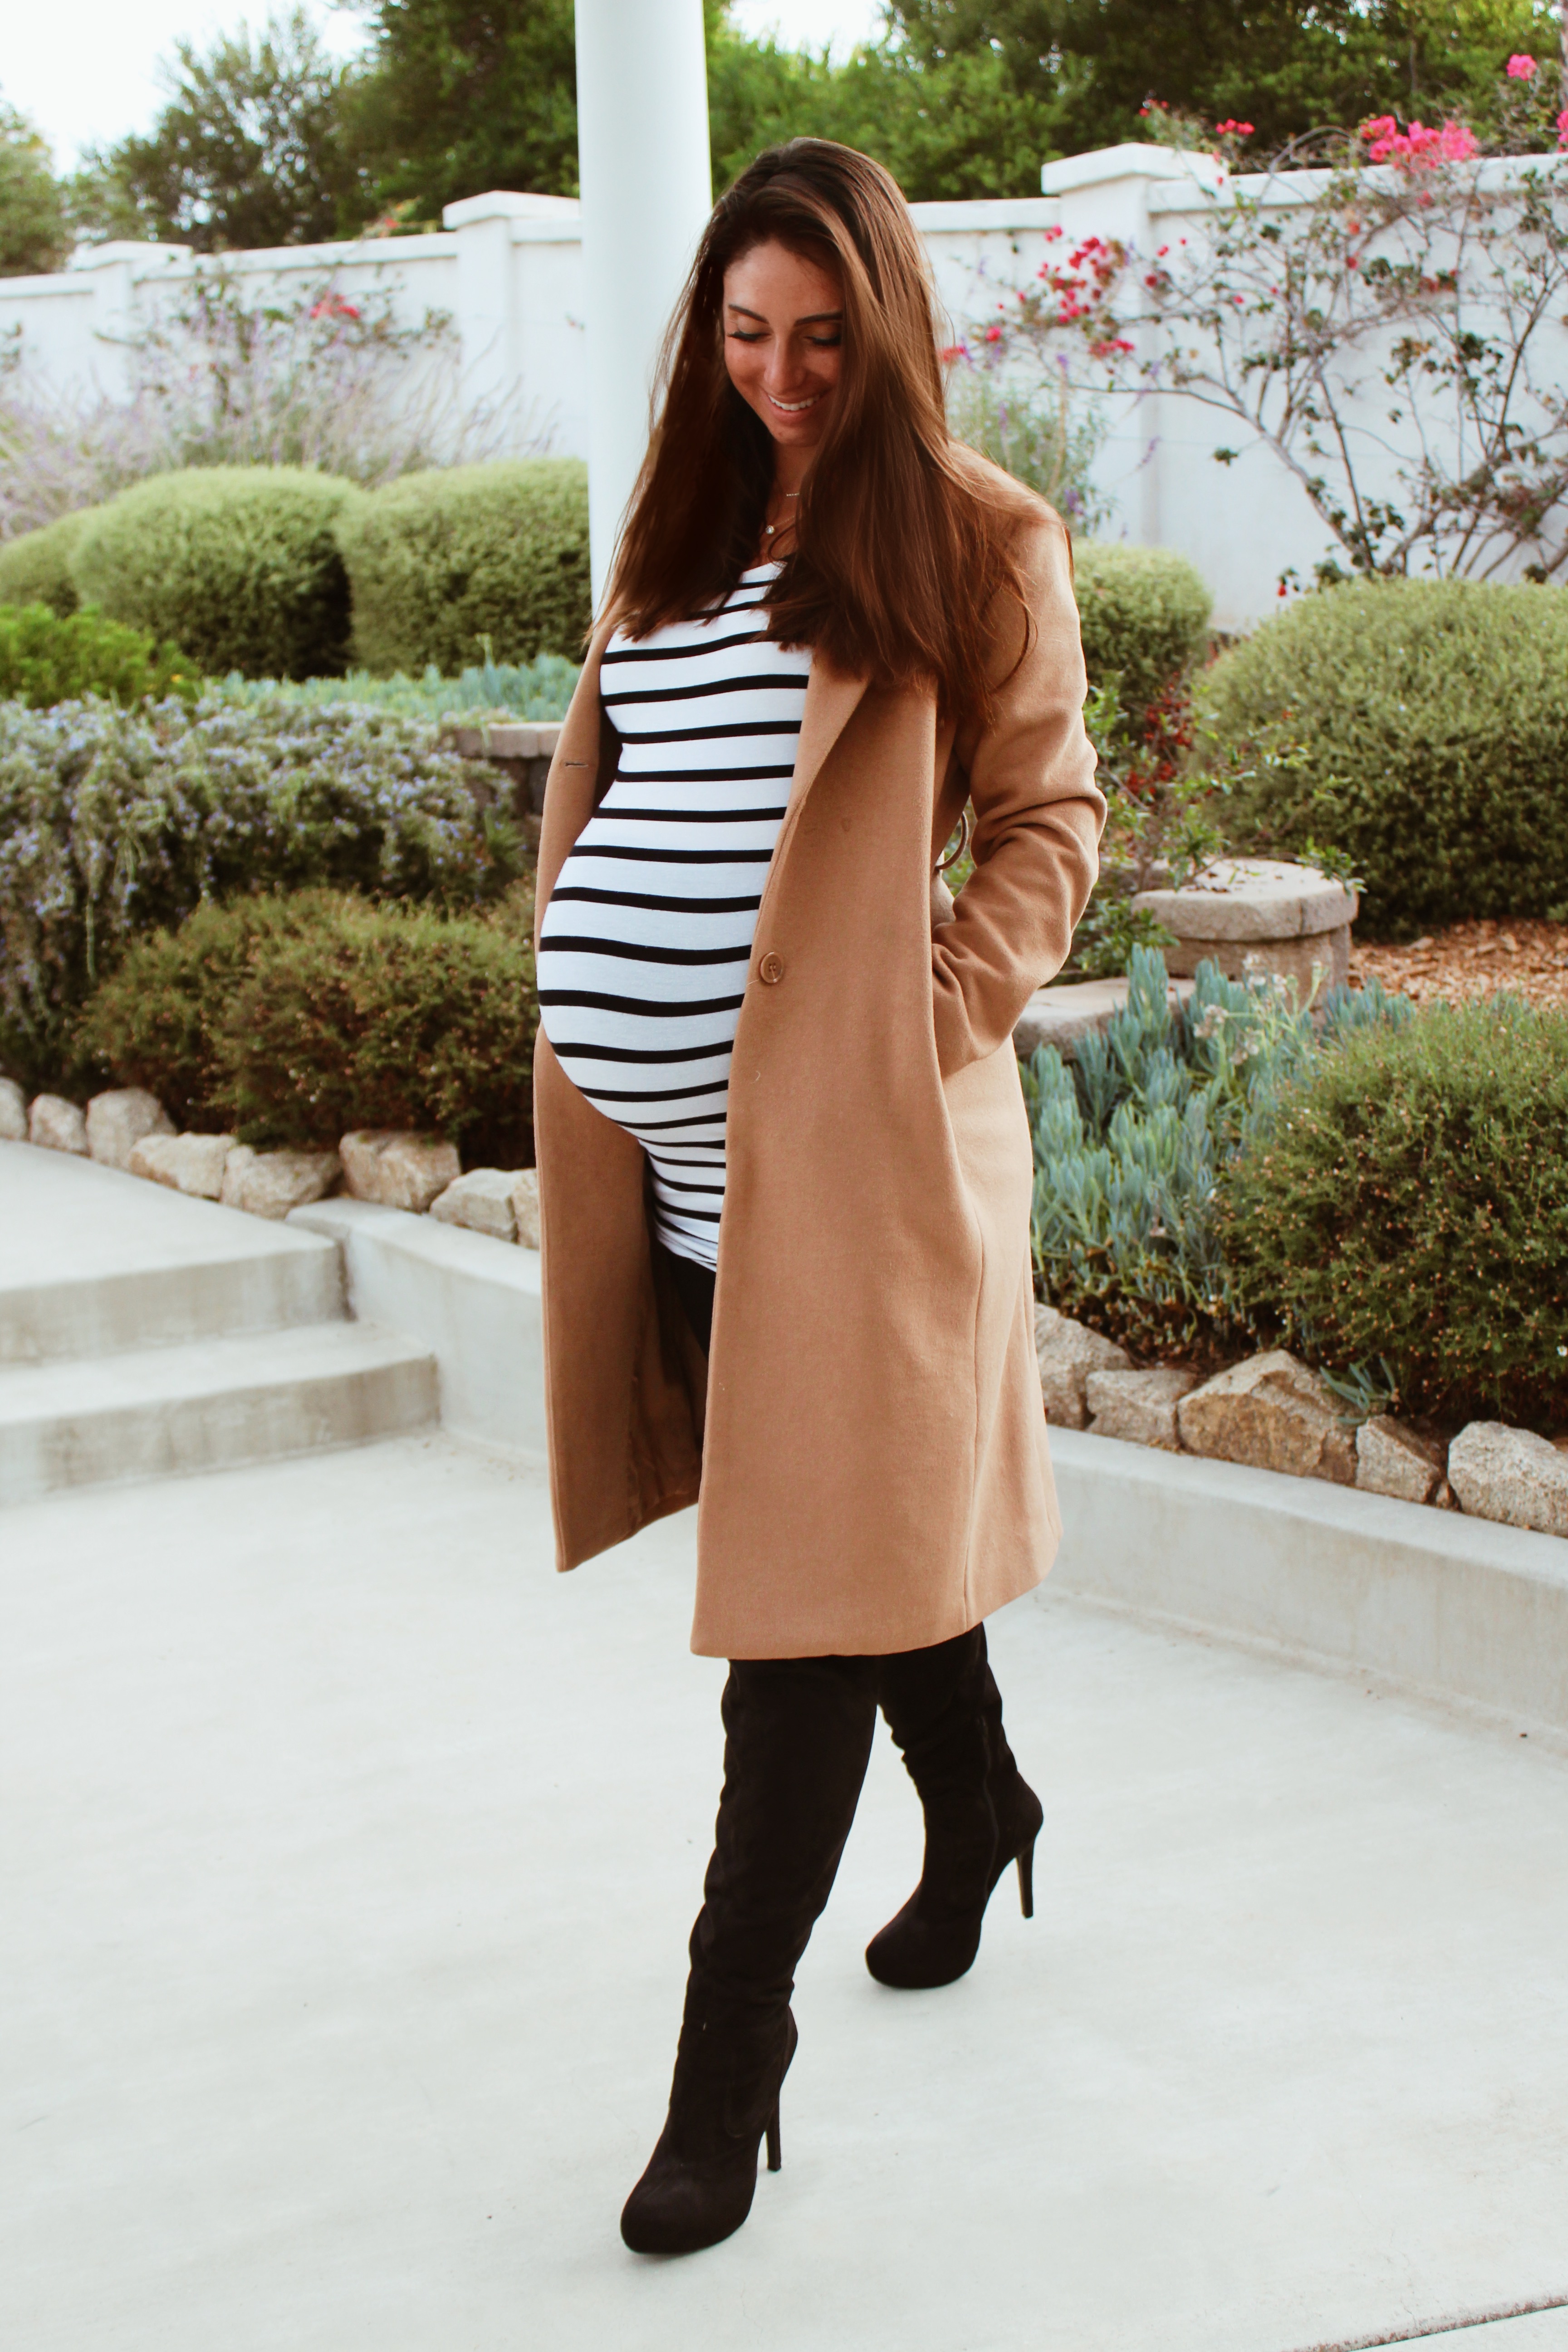 Winter pregnancy fashion: what to wear over your bump, Pregnancy articles  & support